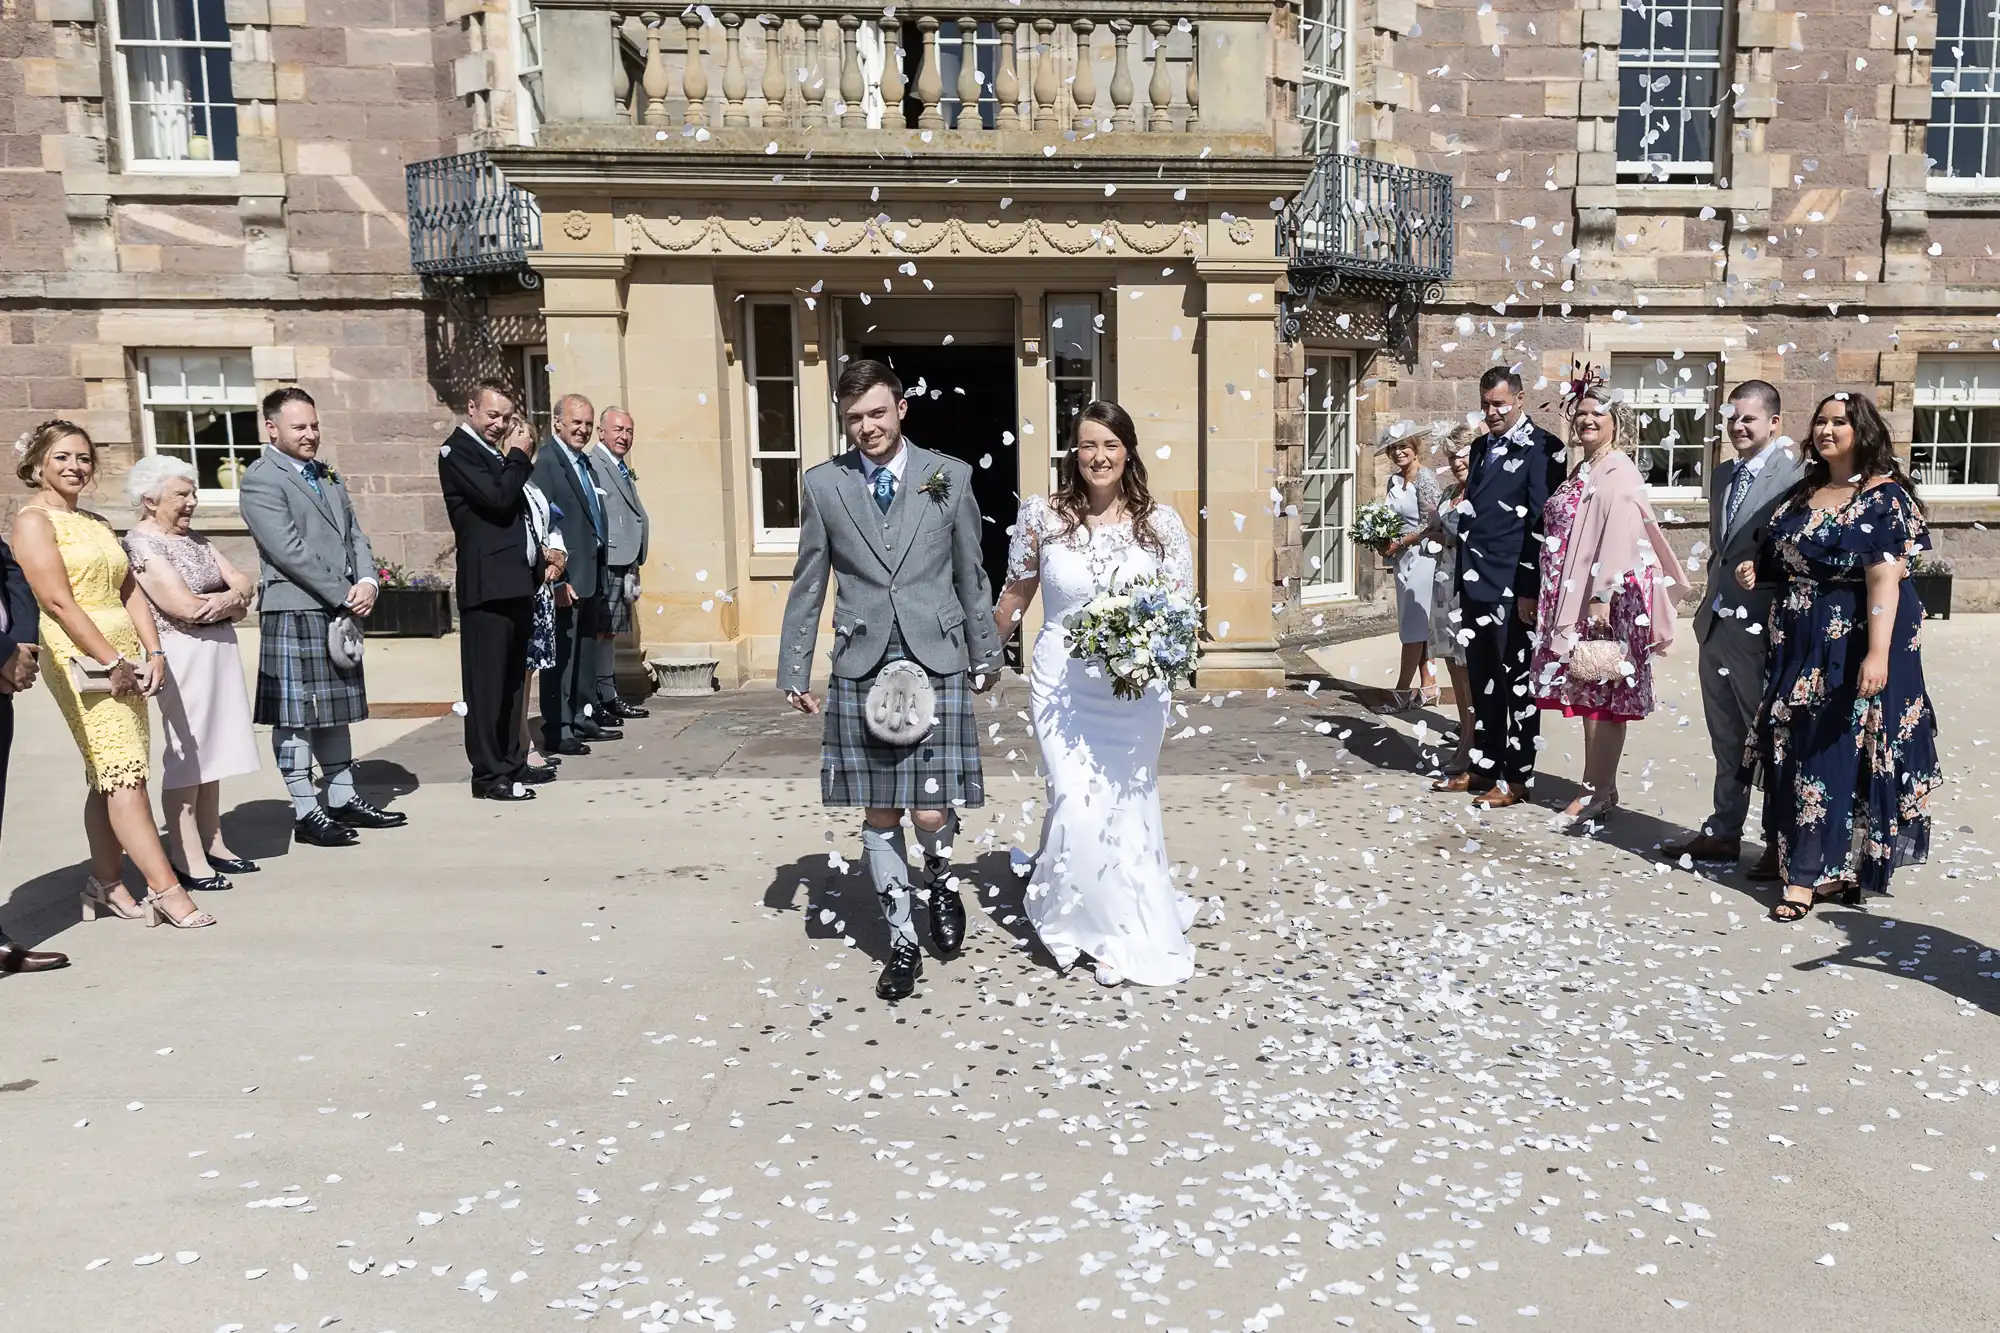 A bride and groom in traditional scottish attire exit a grand building, smiling as guests throw flower petals on a sunny day.